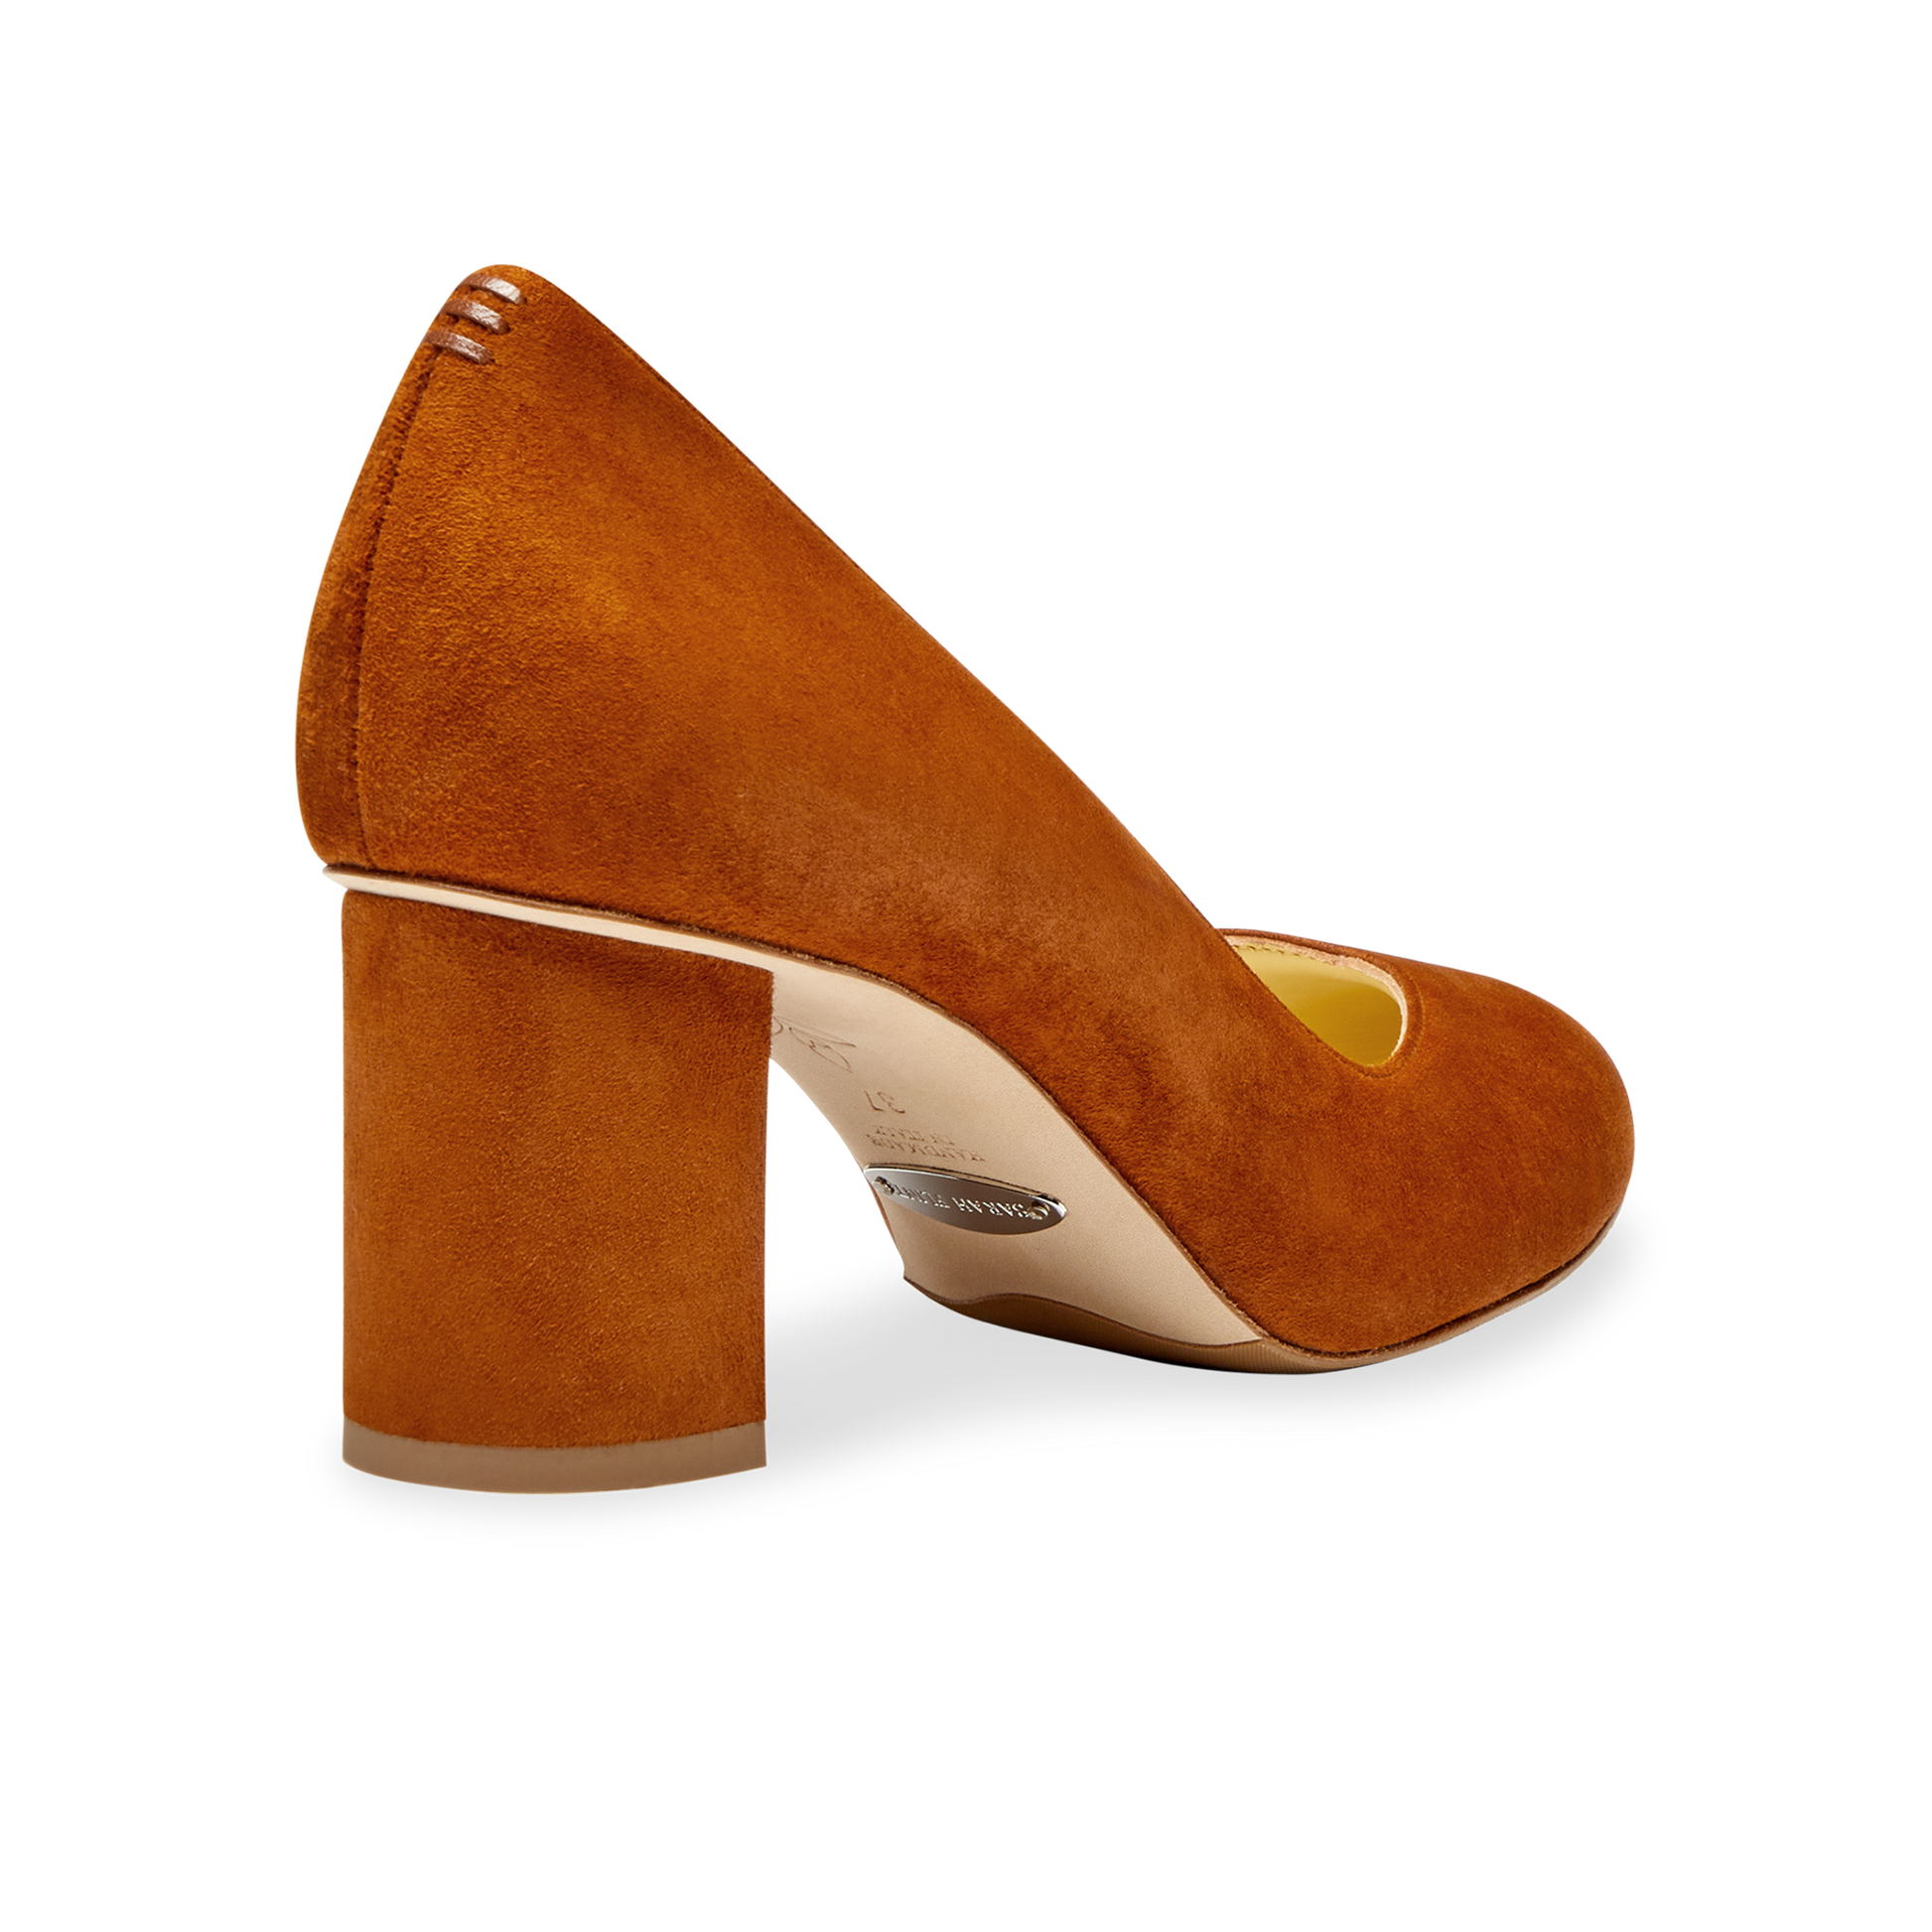 Perfect Round Toe Pump in Cognac Suede Handcrafted in Italy